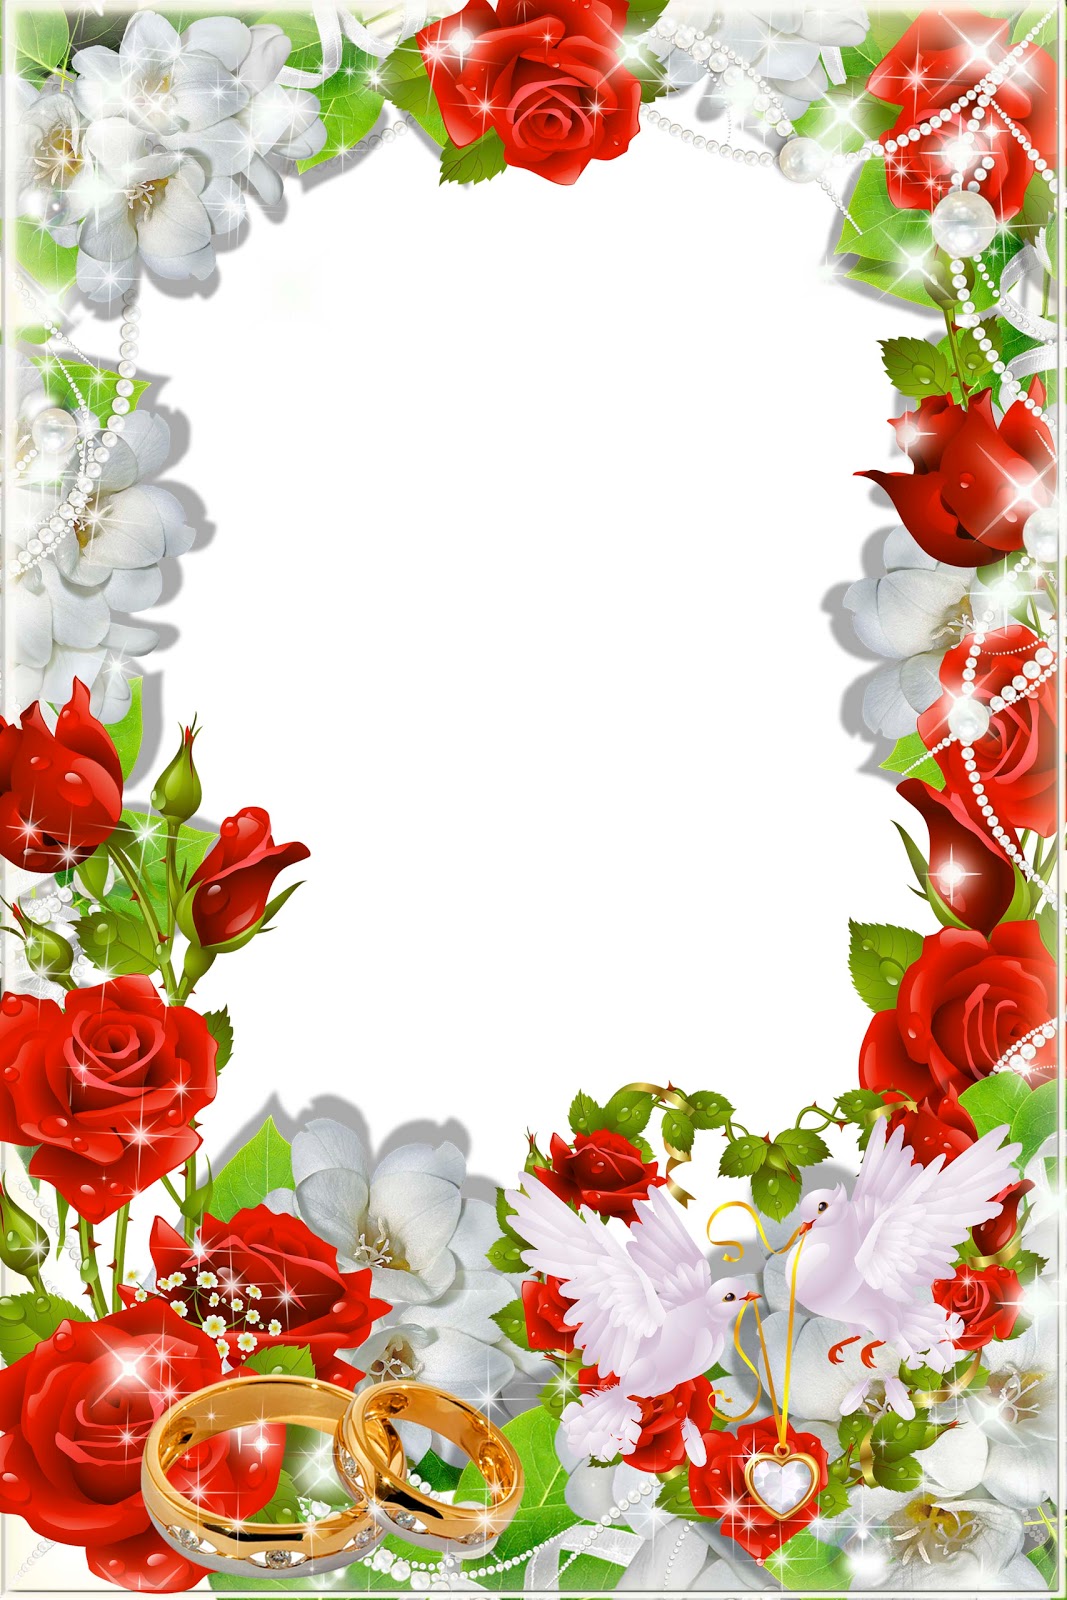 Wedding frame wallpapers pictures hd download with red flowers on white